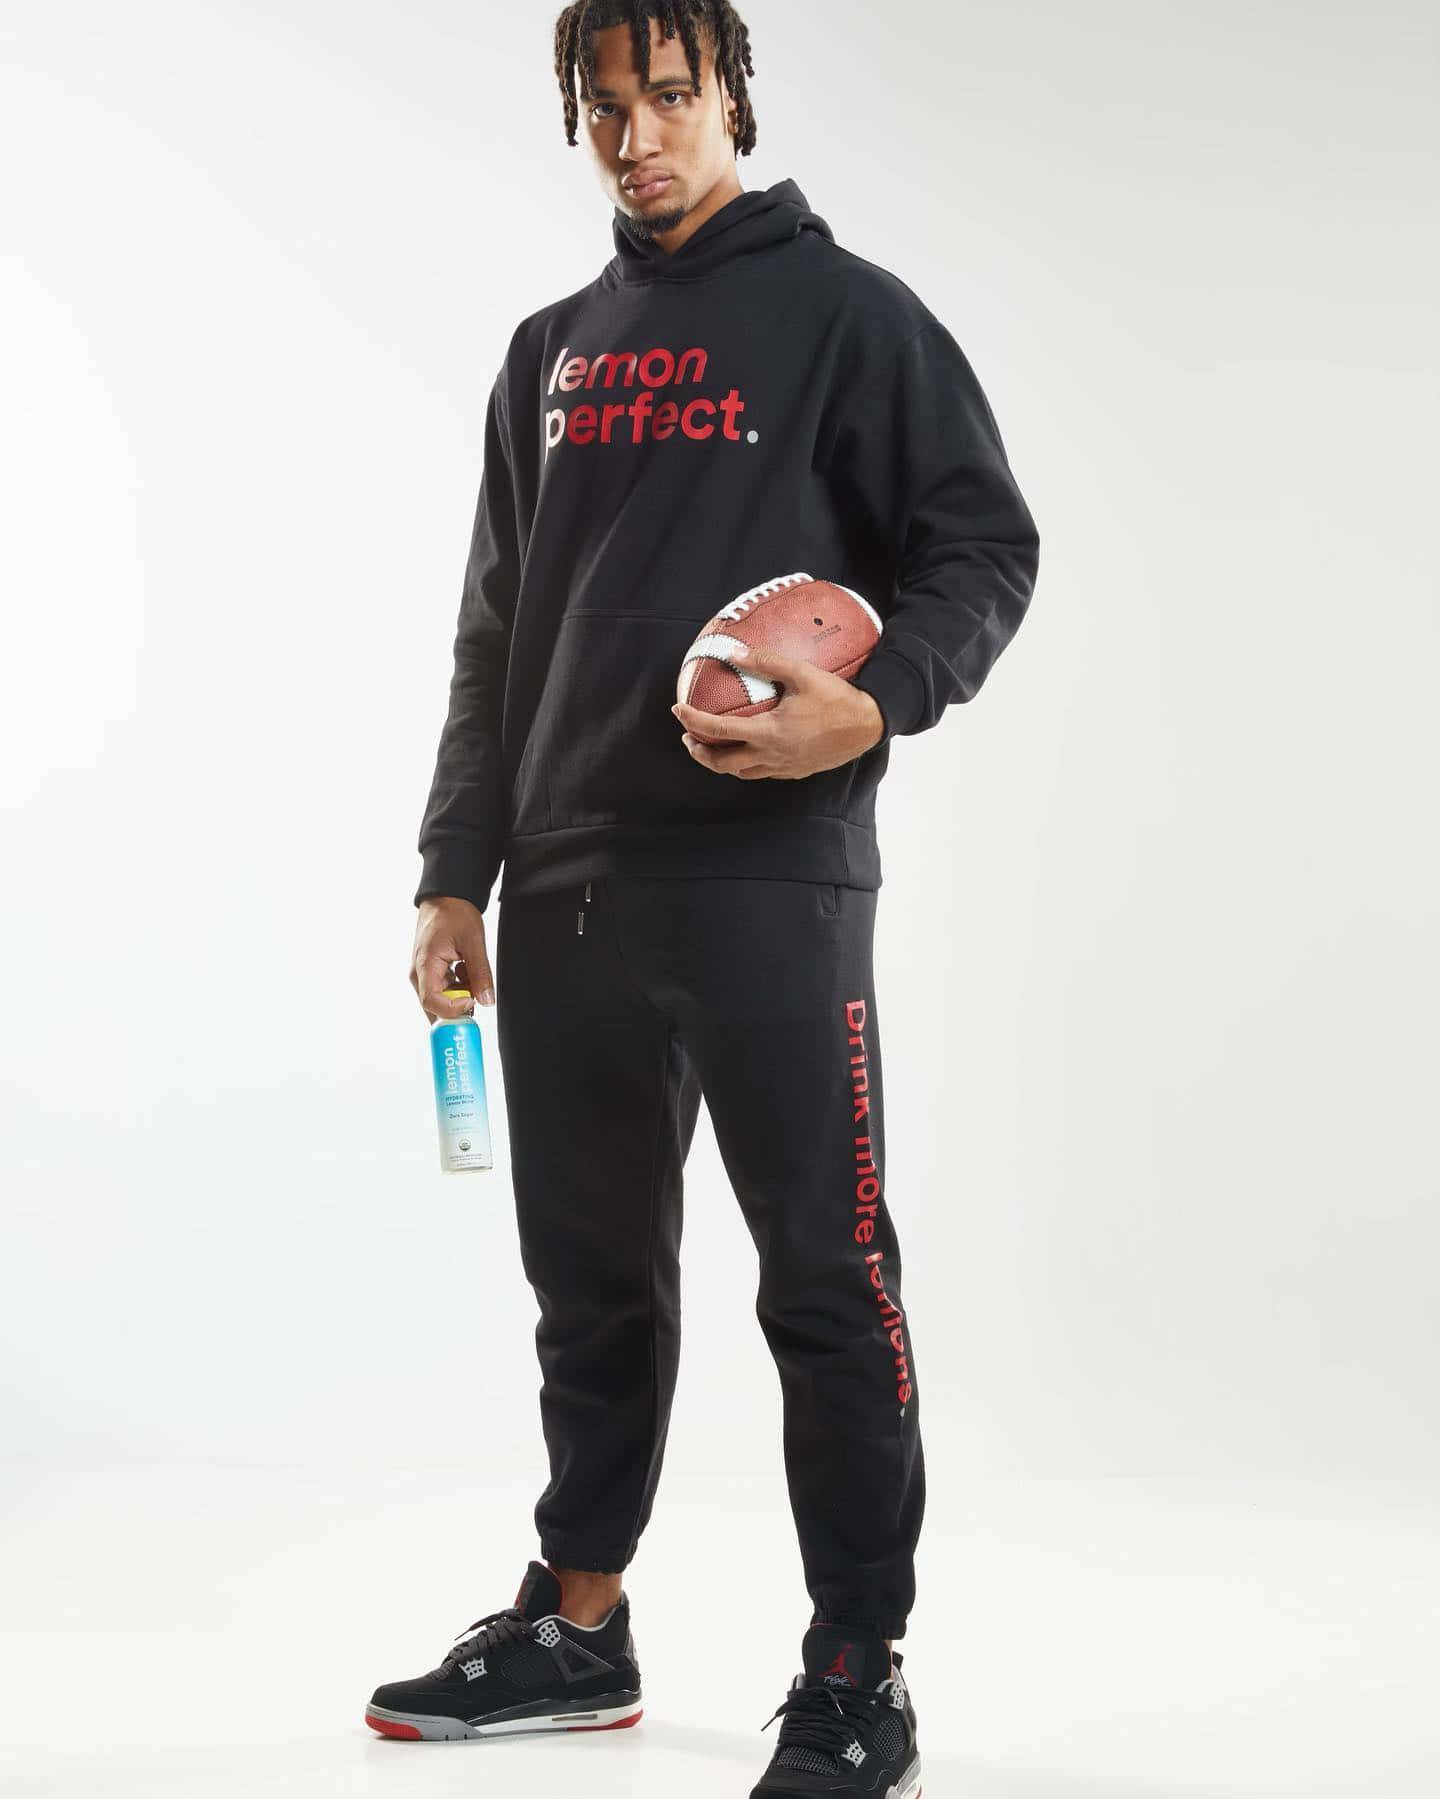 Athletein Casual Wear Holding Football Wallpaper